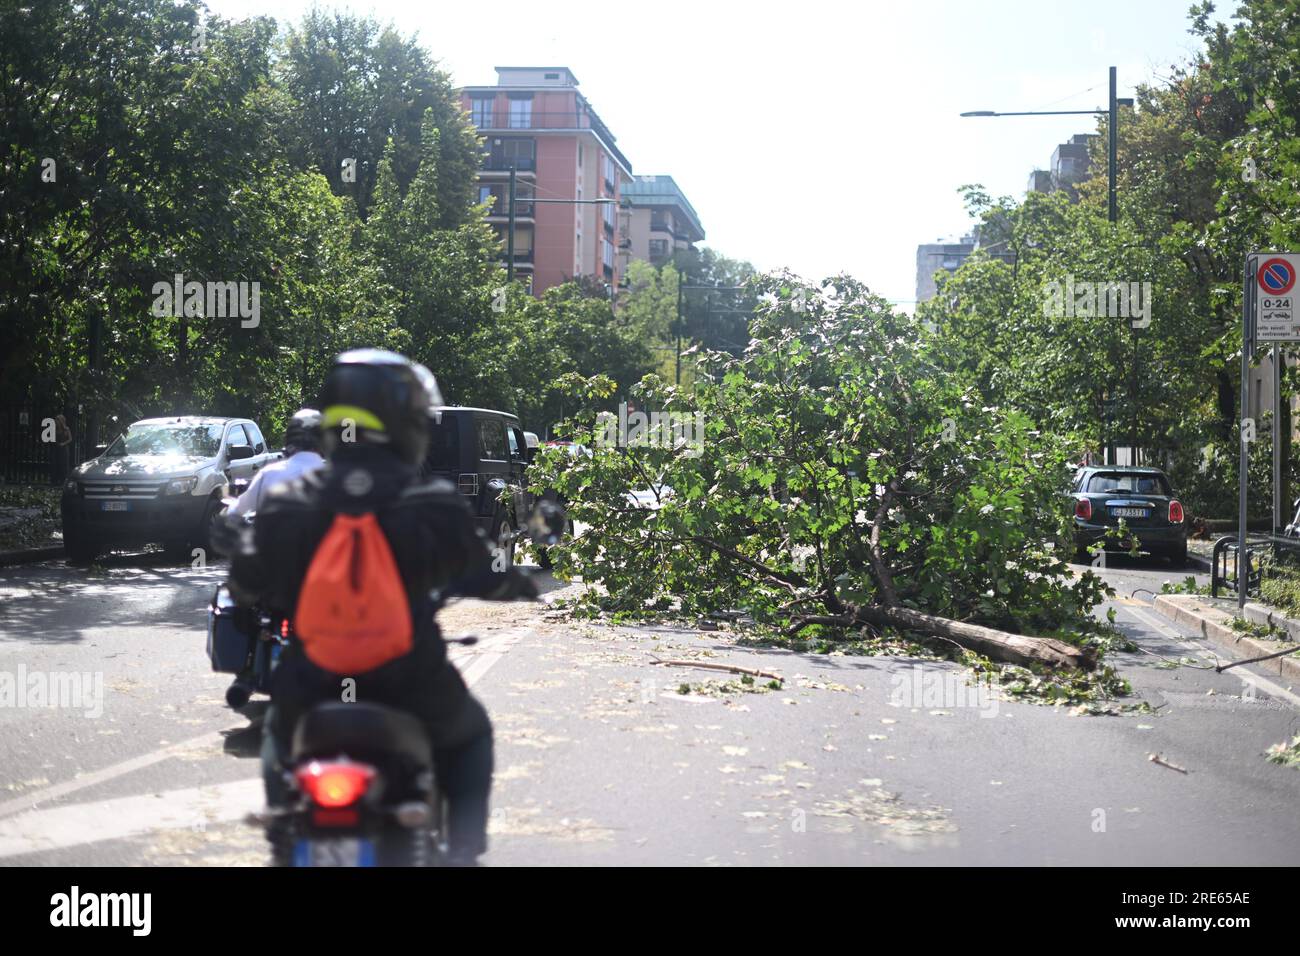 Milan, Italy. 25th July, 2023. A fallen tree is seen on a road after thunderstorms in Milan, Italy, on July 25, 2023. While the southern two-thirds of Italy struggled under the oppressive heat, most of the northern area was pelted by thunderstorms and over-sized hail. Media reports said the emergency services in Milan had responded to more than 200 requests for help related to flooding, fallen trees, and damage to cars and homes, since a severe storm hit the city late Monday. Credit: Str/Xinhua/Alamy Live News Stock Photo